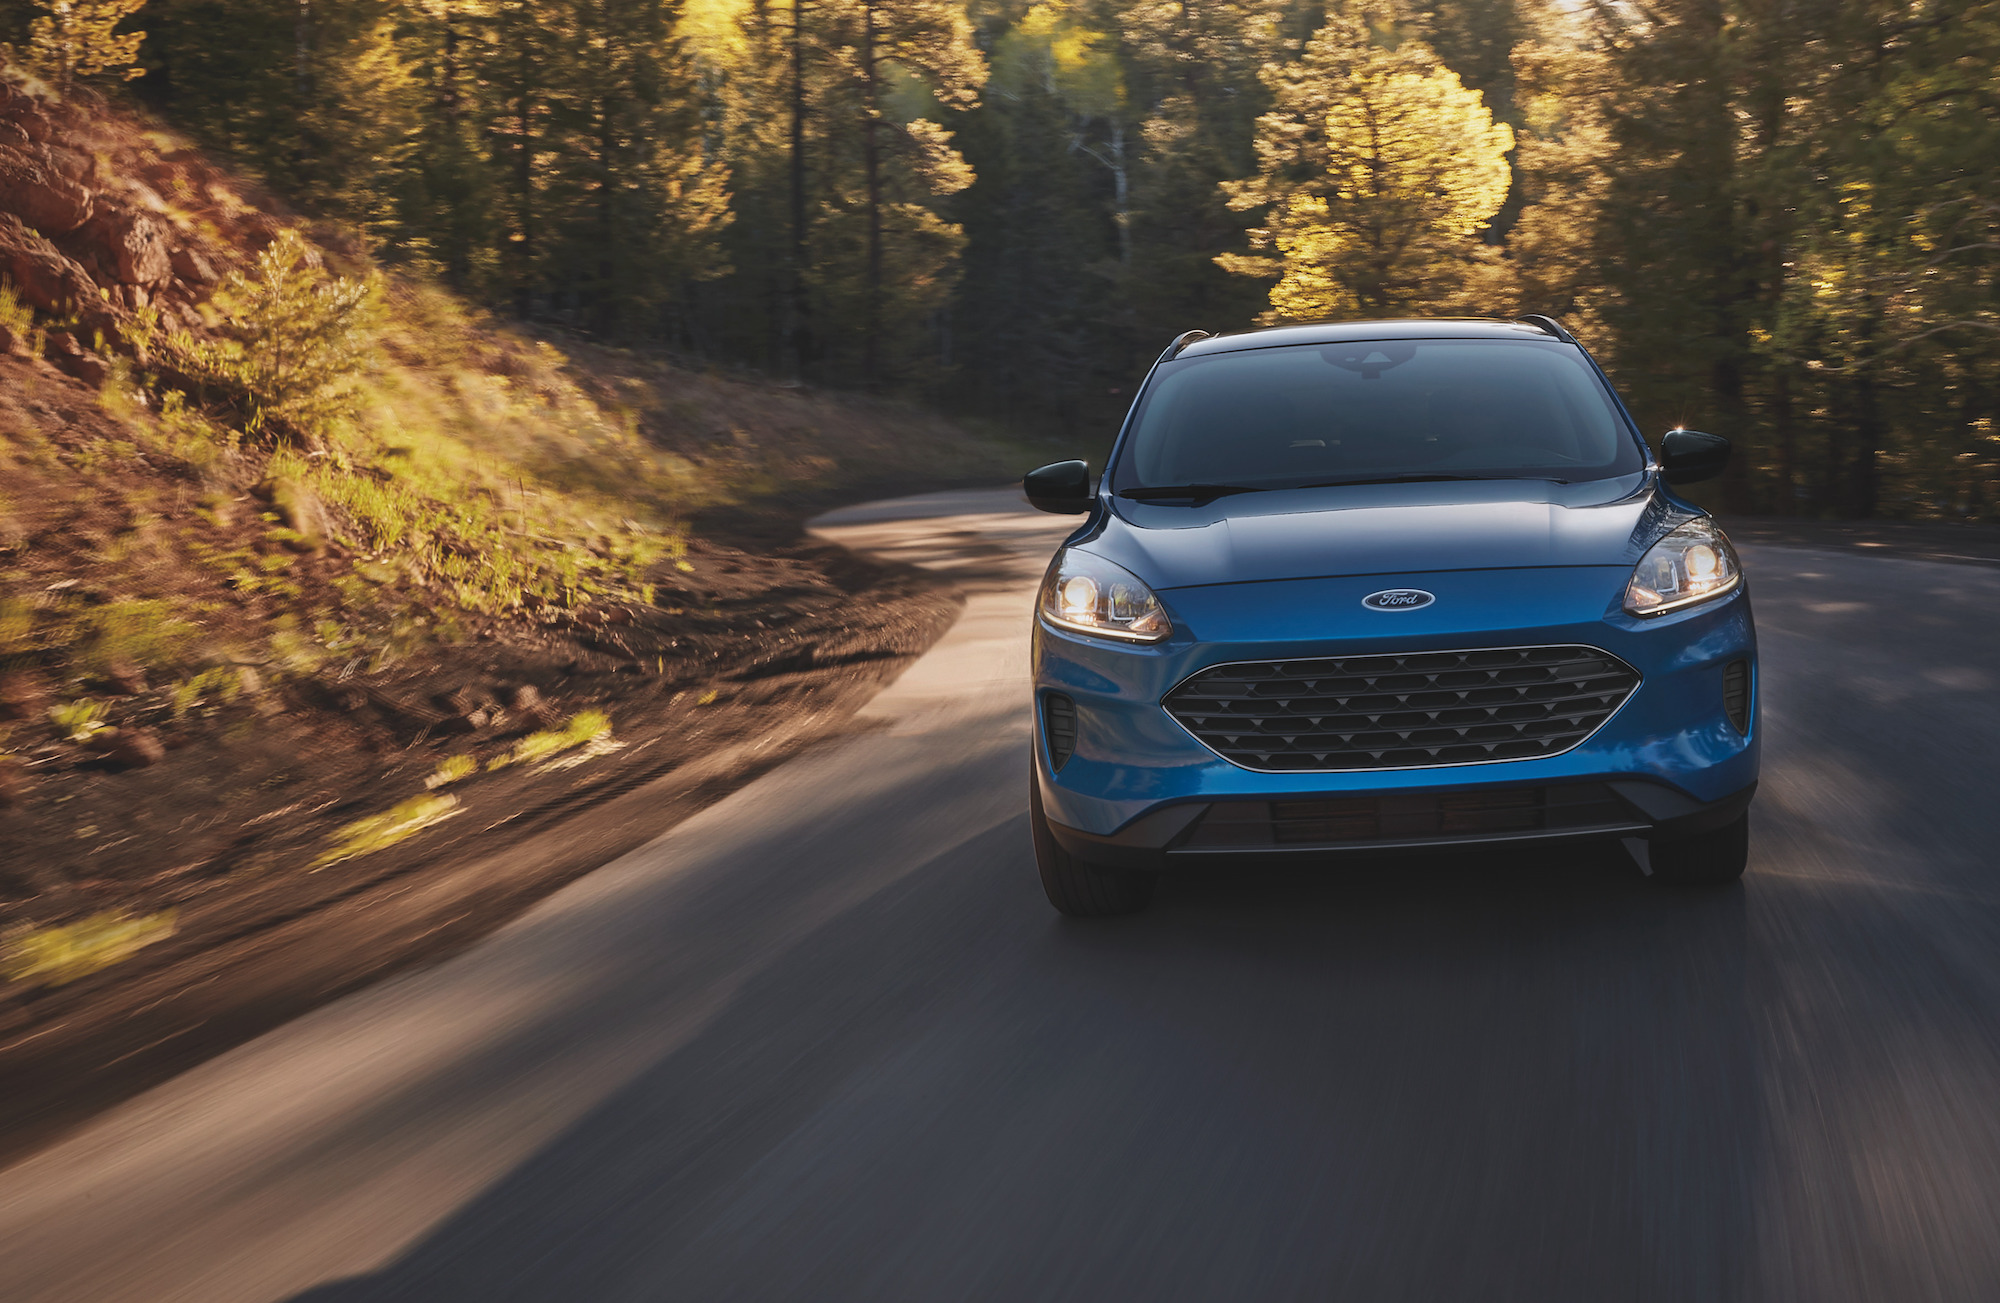 A blue metallic 2021 Ford Escape compact SUV travels on a tree-lined, sun-dappled country road